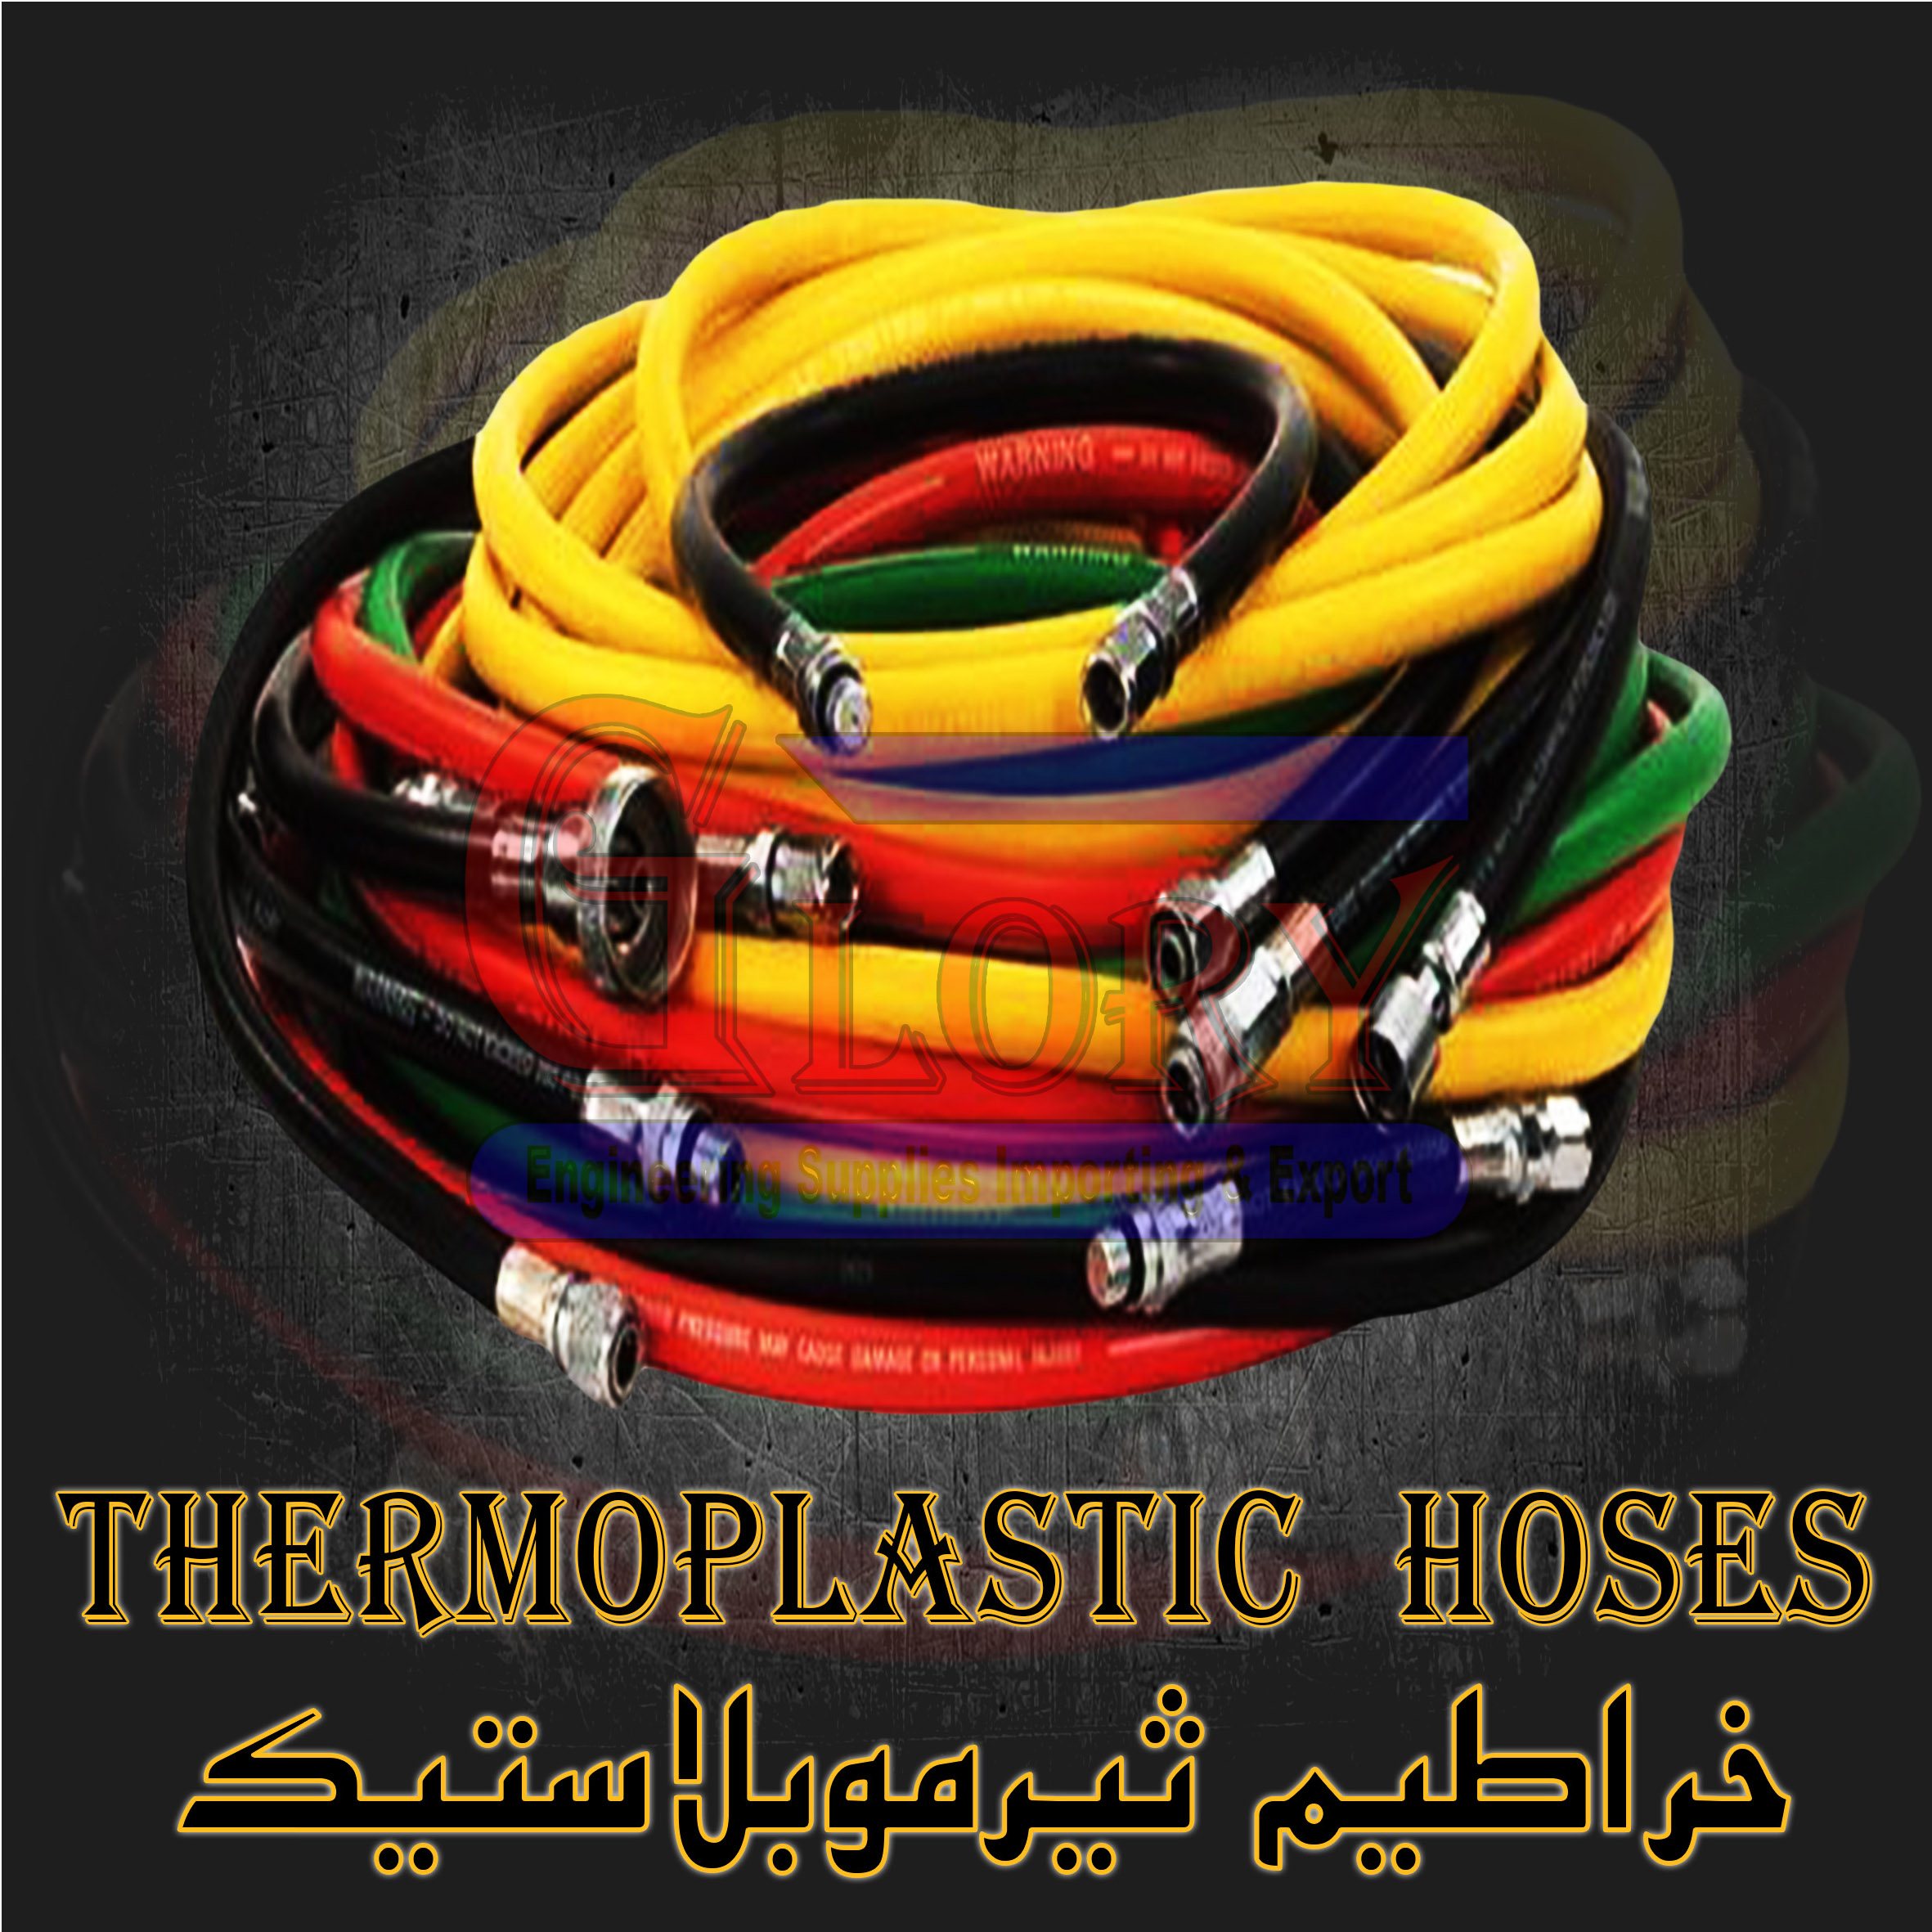 THERMOPLASTIC HOSES